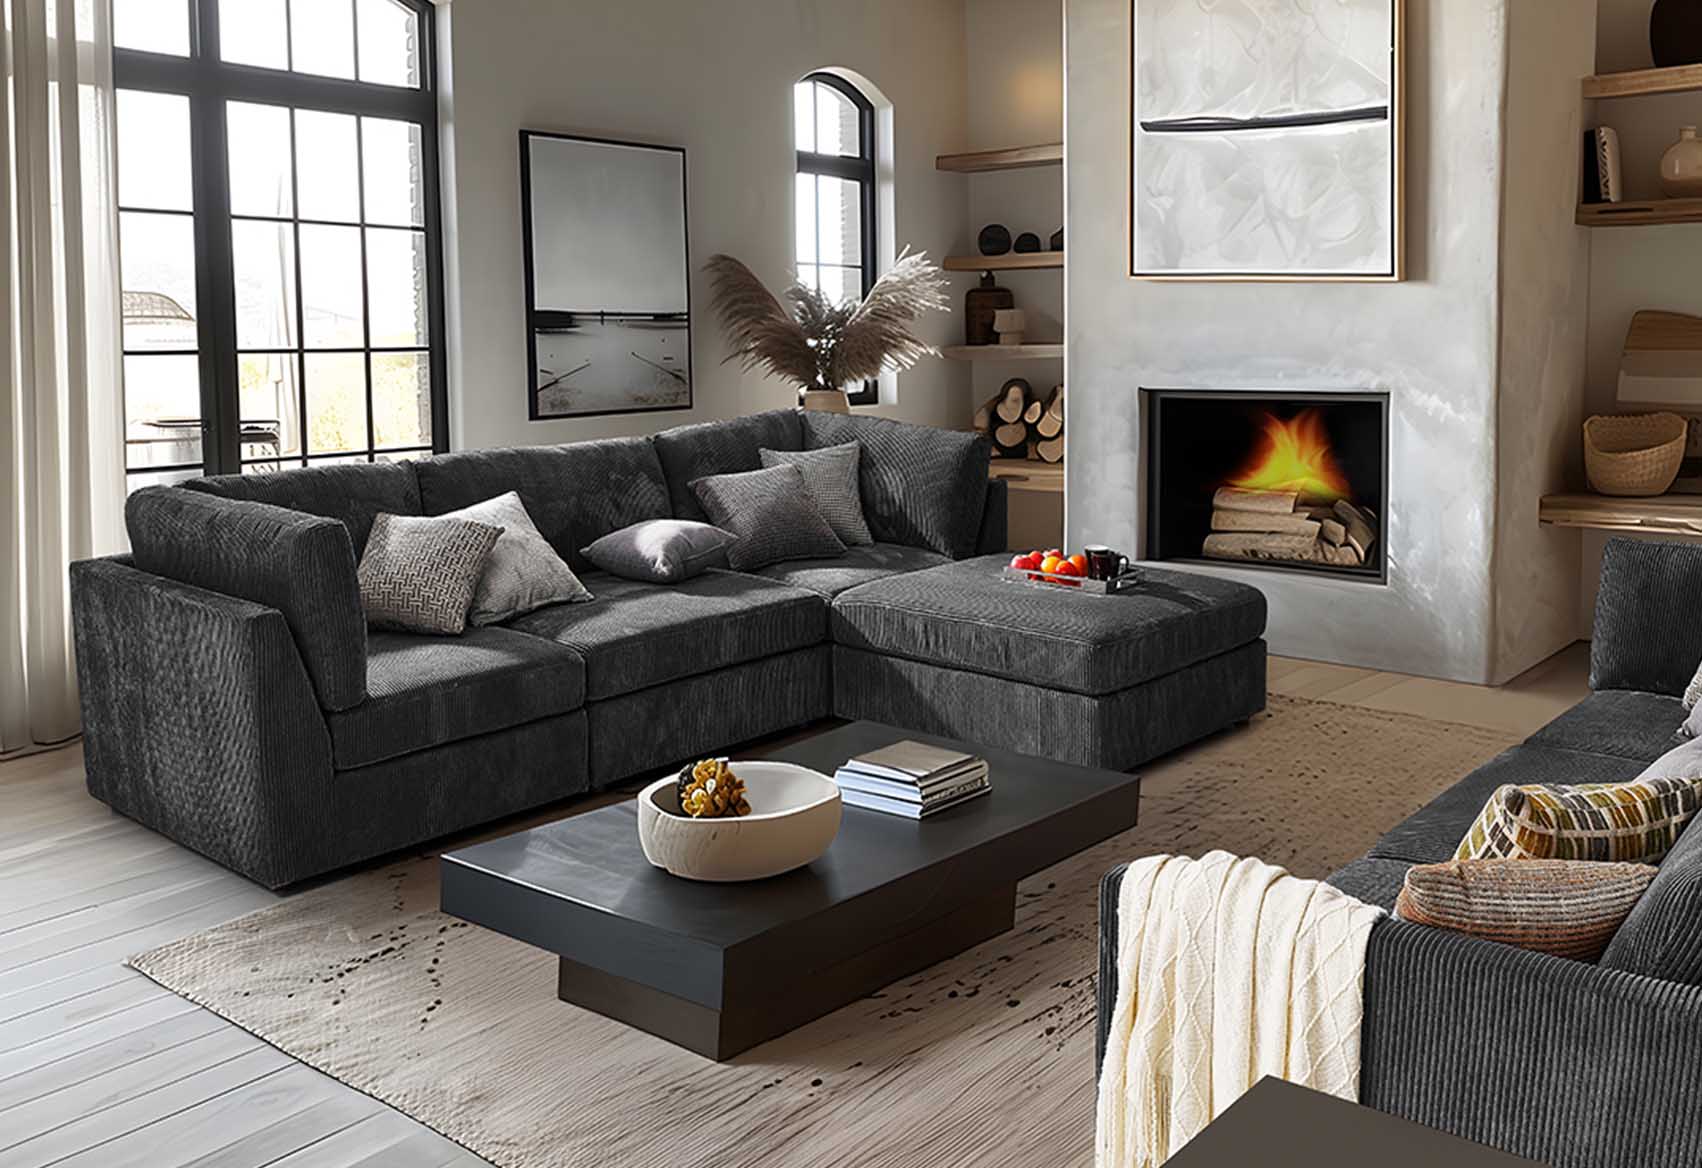 Discover the Versatility of Covecrafter’s Modular Corner Sofas